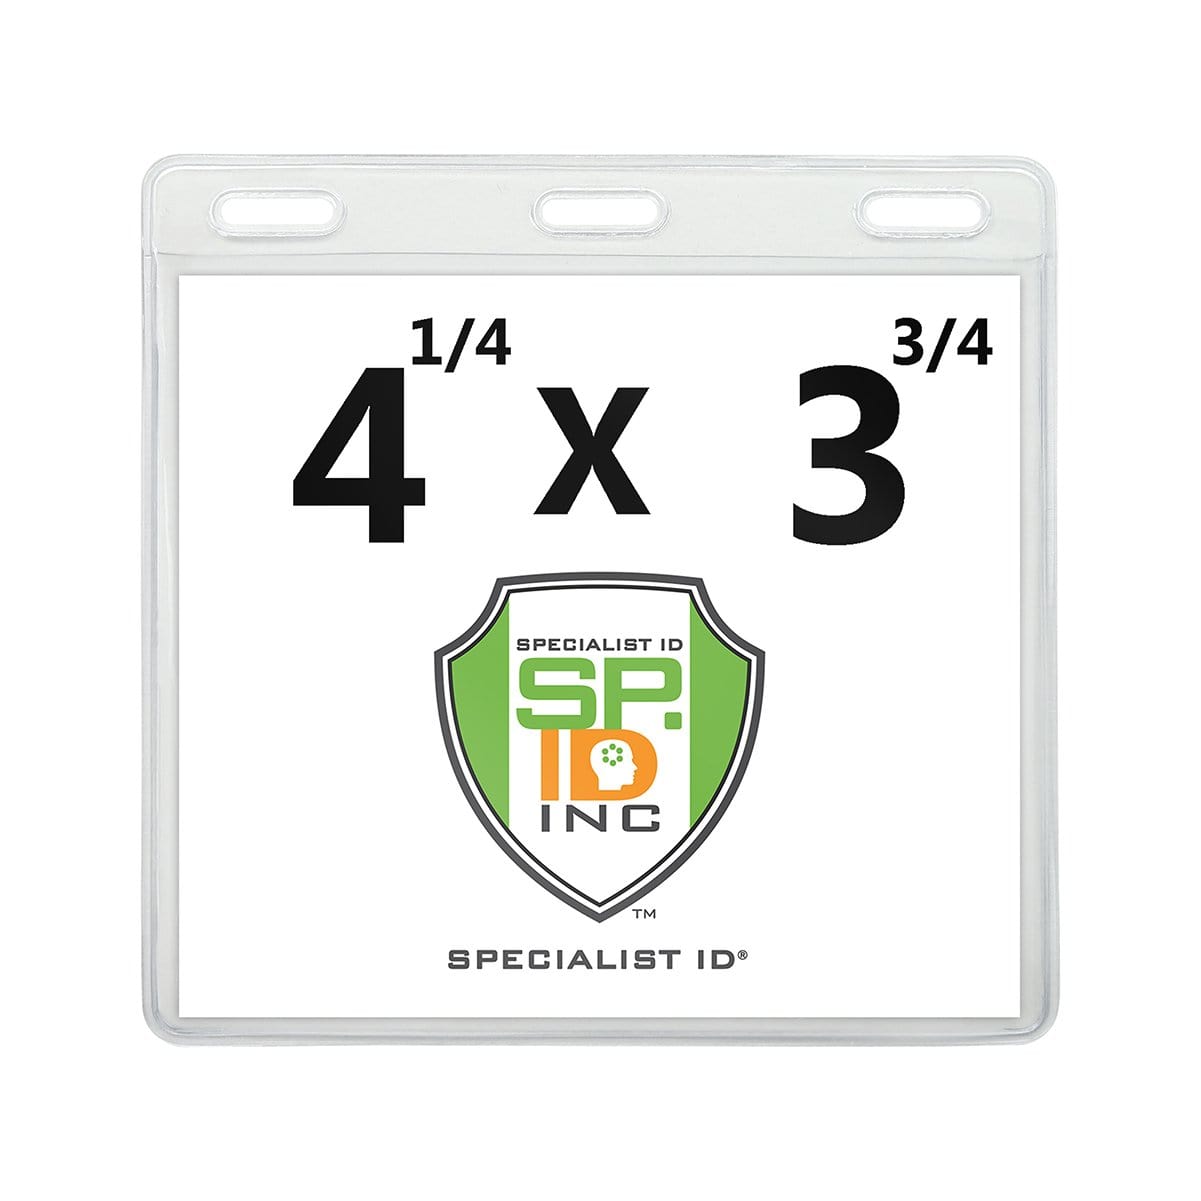 Large Vaccination Card Holder with Extra Room 4 1/4 X 3 3/4 - Clear Vinyl Horizontal Event Badge Holder (1840-1618) 1840-1618